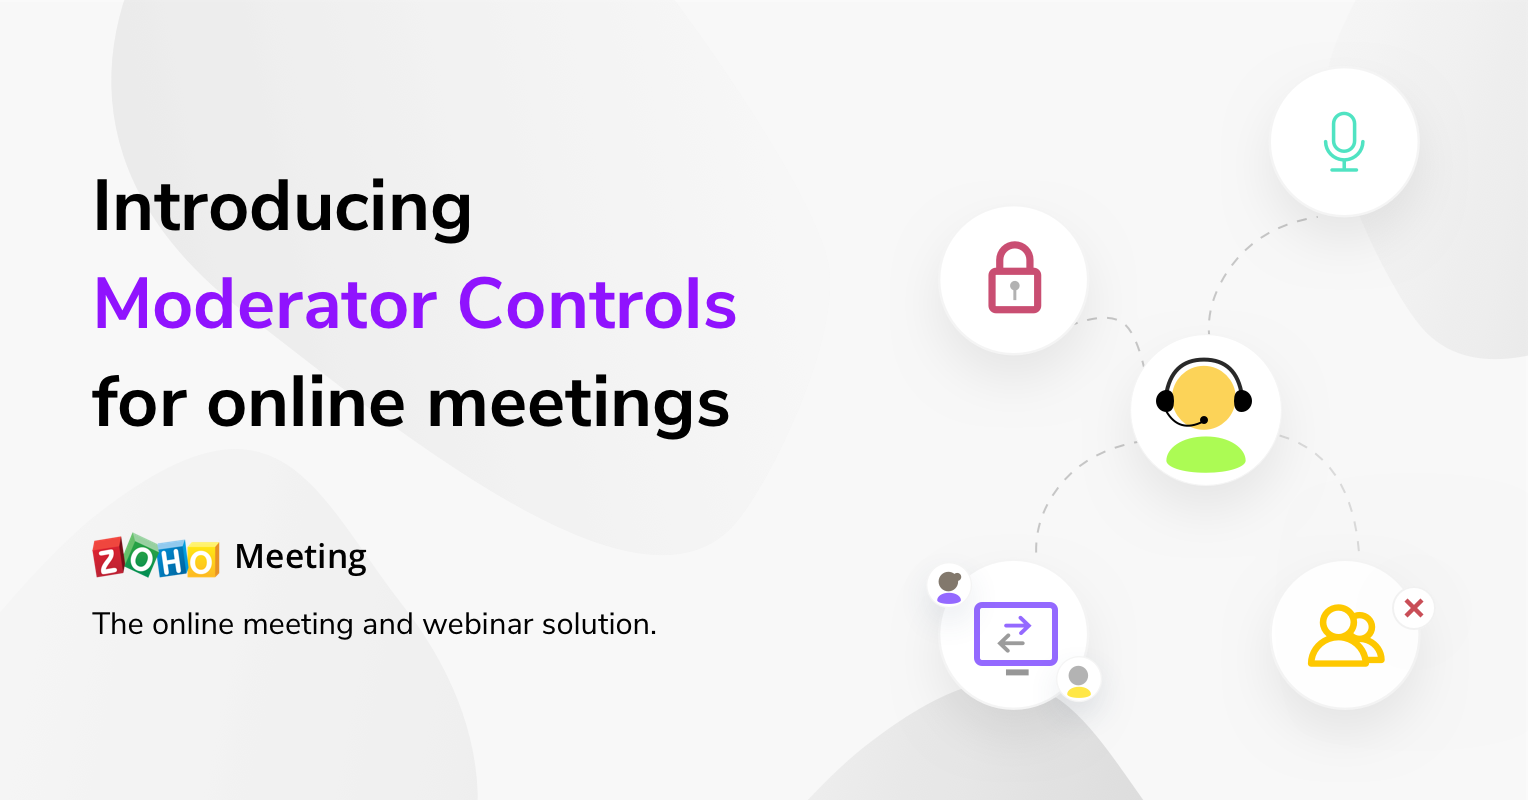 Moderator Controls for online meetings